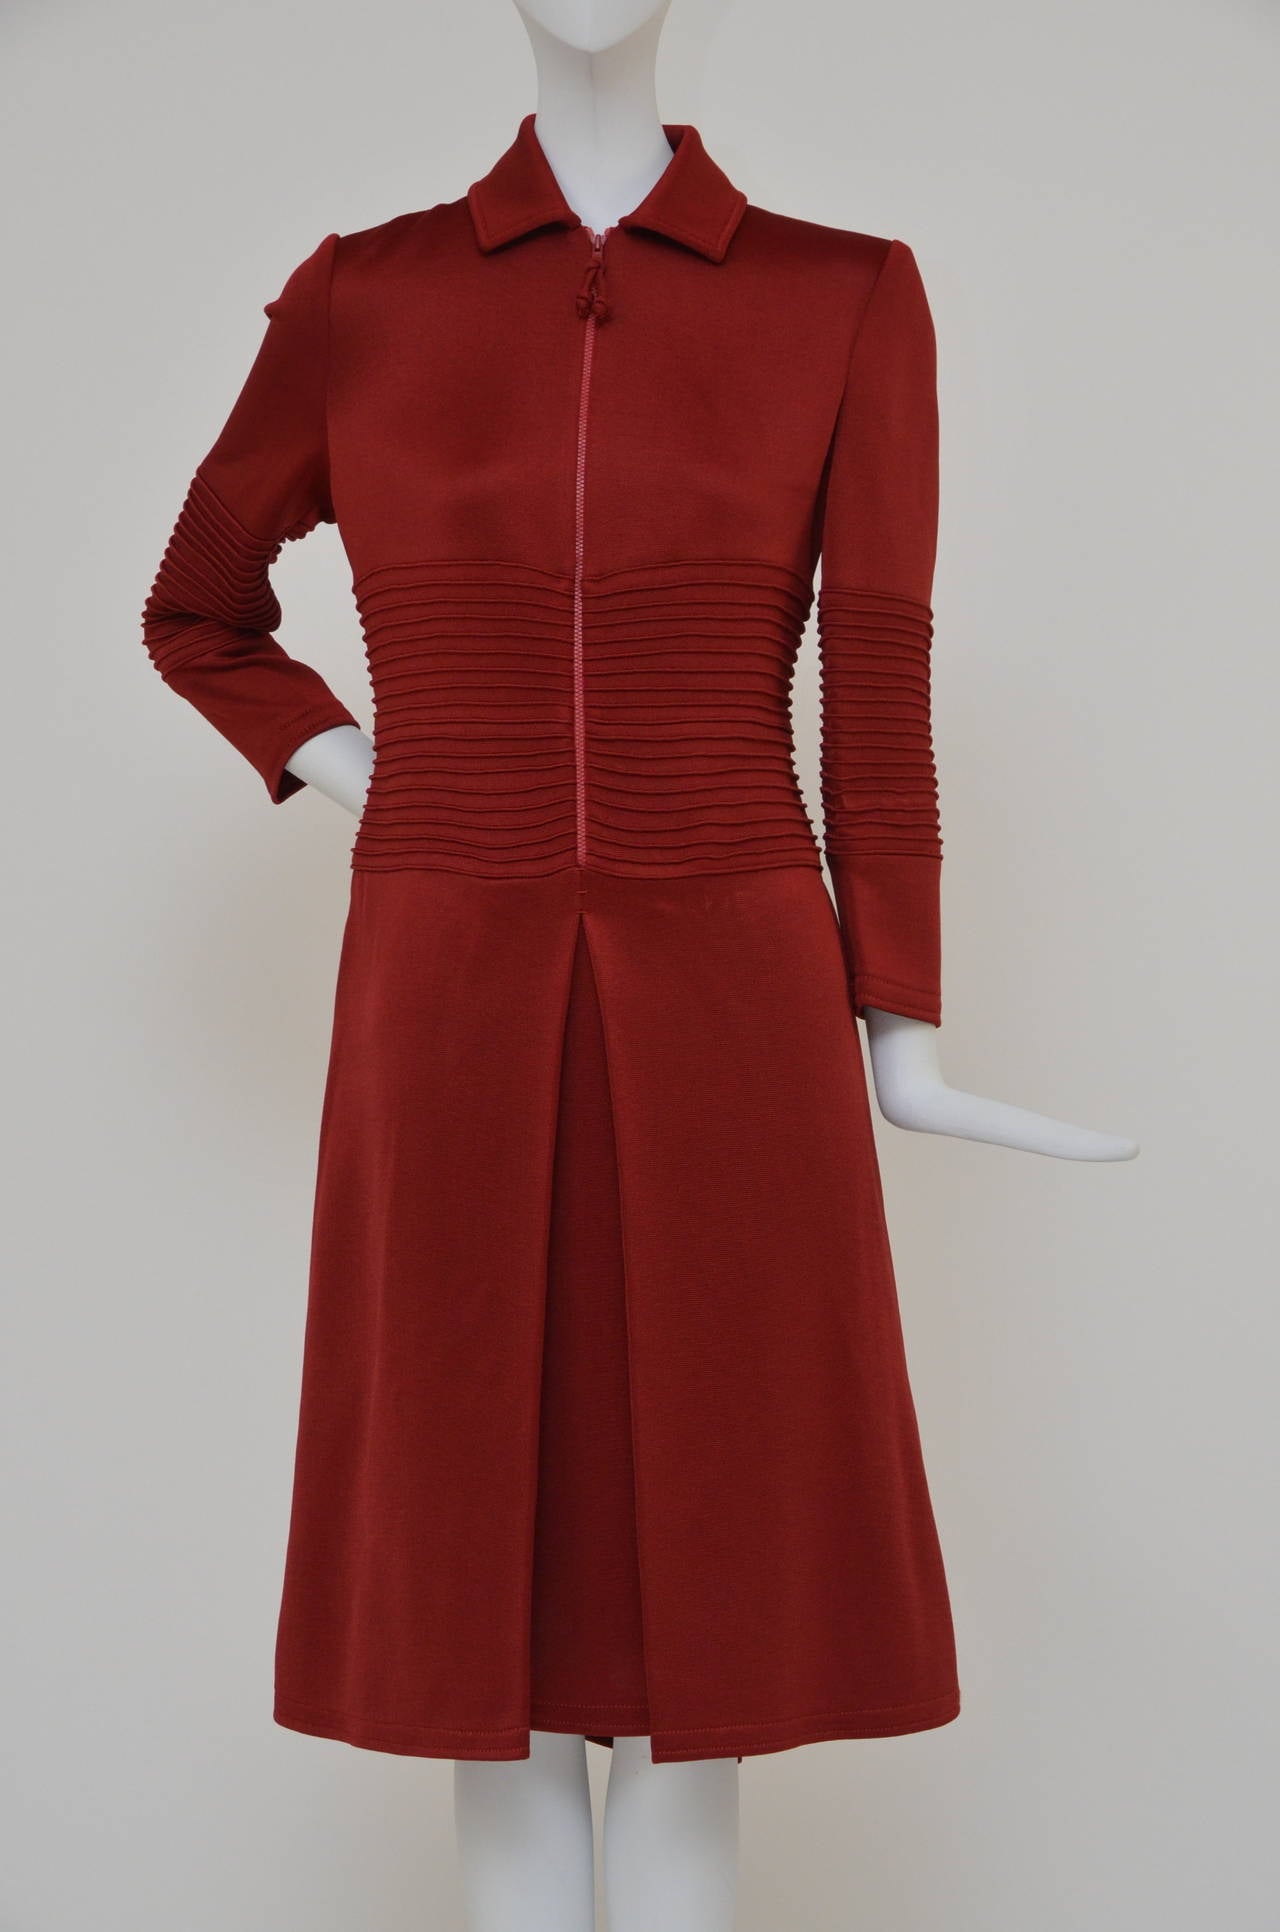 Look 7 from the Fall 2011 Chado Ralph Rucci runway show. This distinctive red Chado Ralph Rucci dress allows you to control your coverage from ladylike to racy with a clever front zip. For a poised and polished finish, style with red wrist gloves